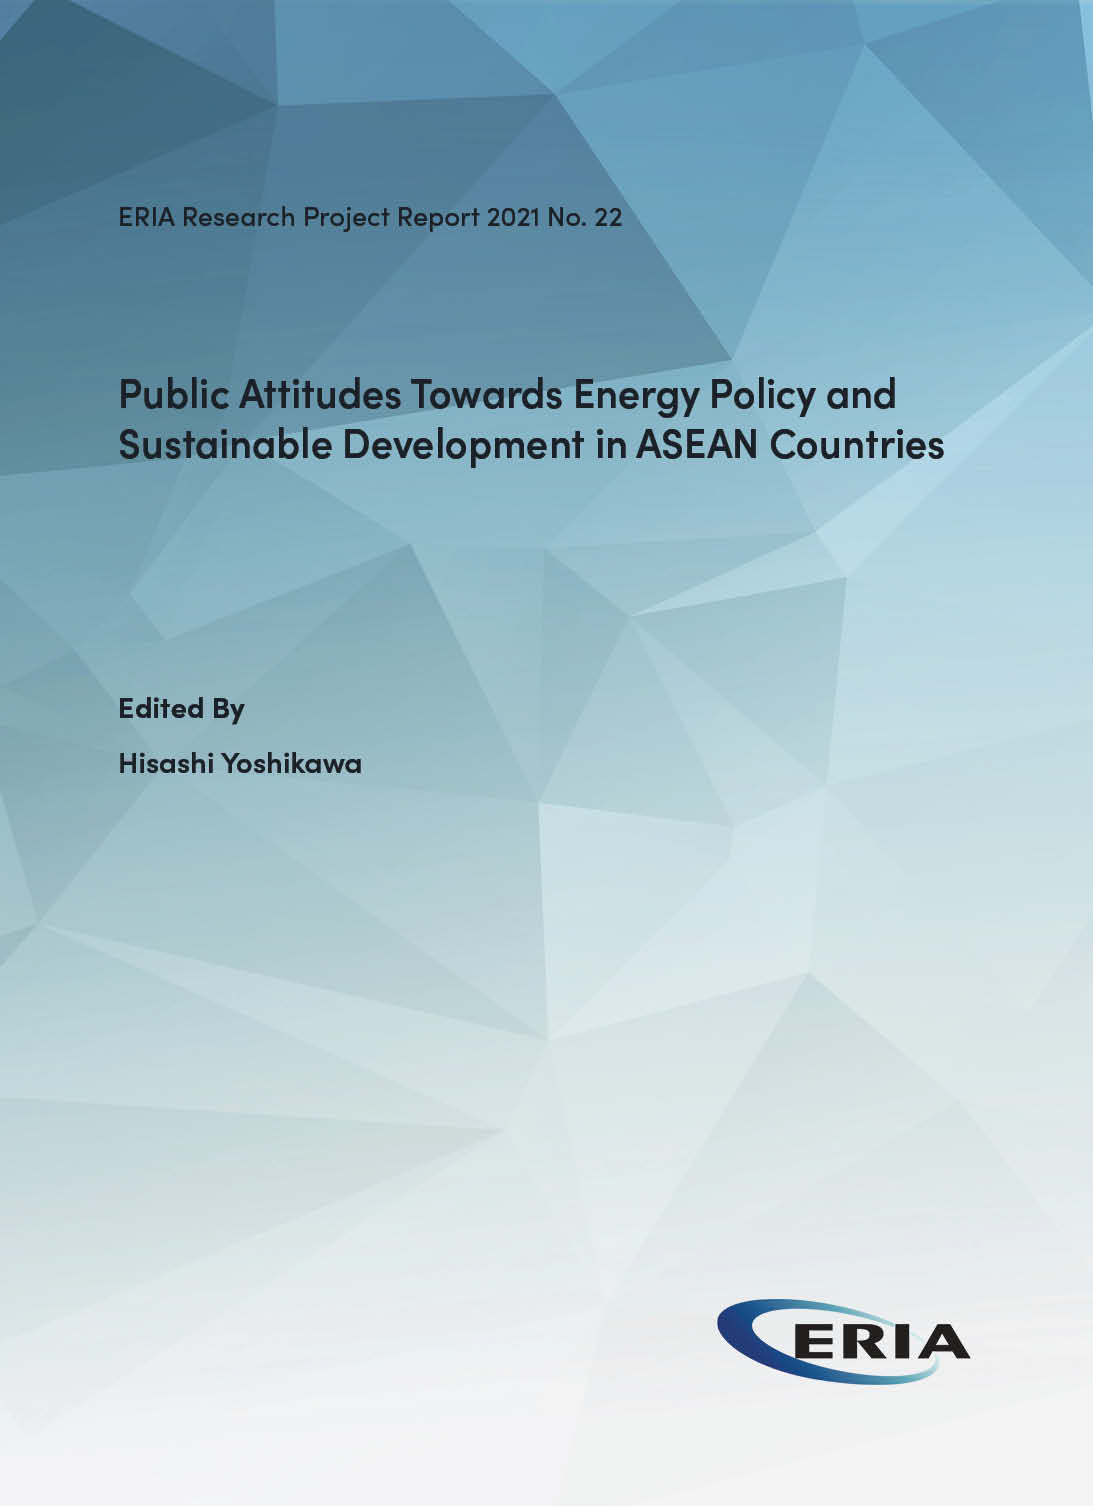 Public Attitudes Towards Energy Policy and Sustainable Development in ASEAN Countries